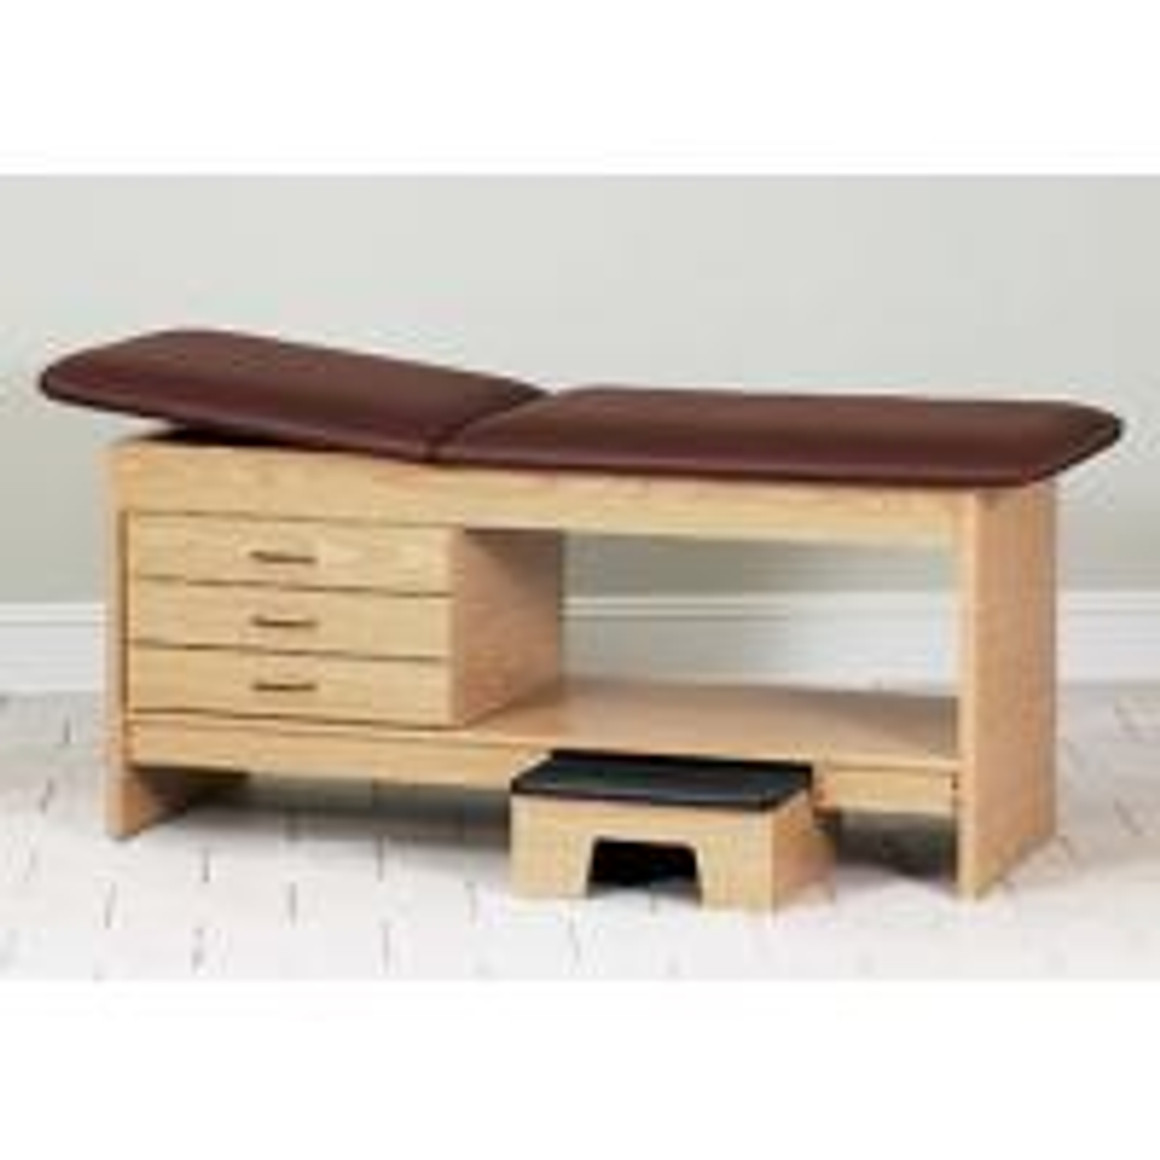 Clinton Styleline Laminate Treatment Table with Stool, 27" Wide, Aubergine